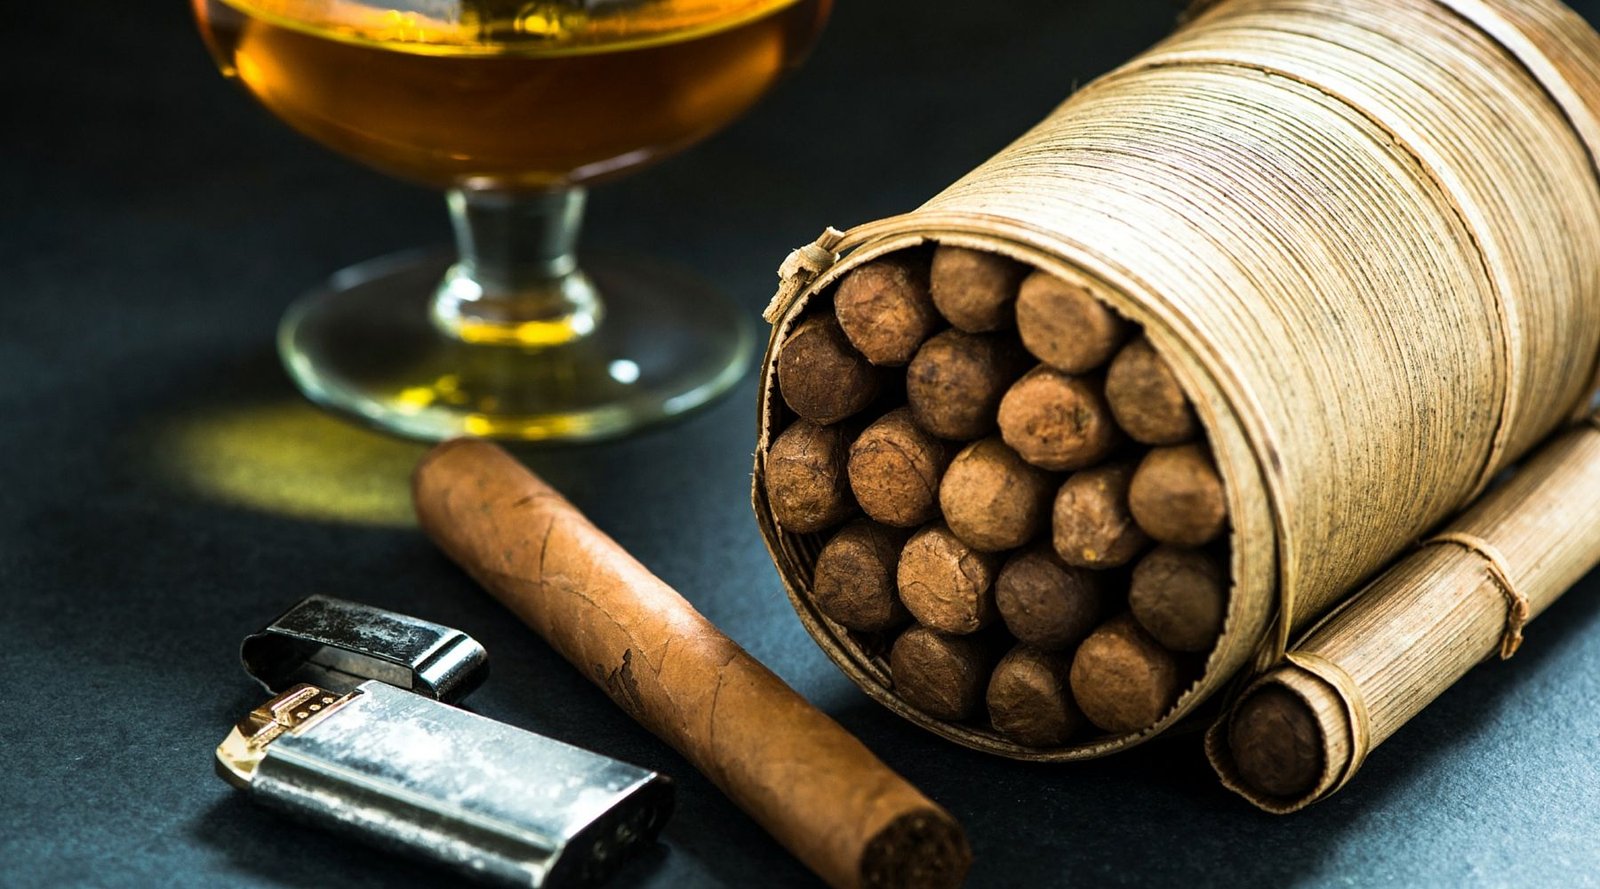 Cuba is known for its cigars, which are thought to be the finest in the world.